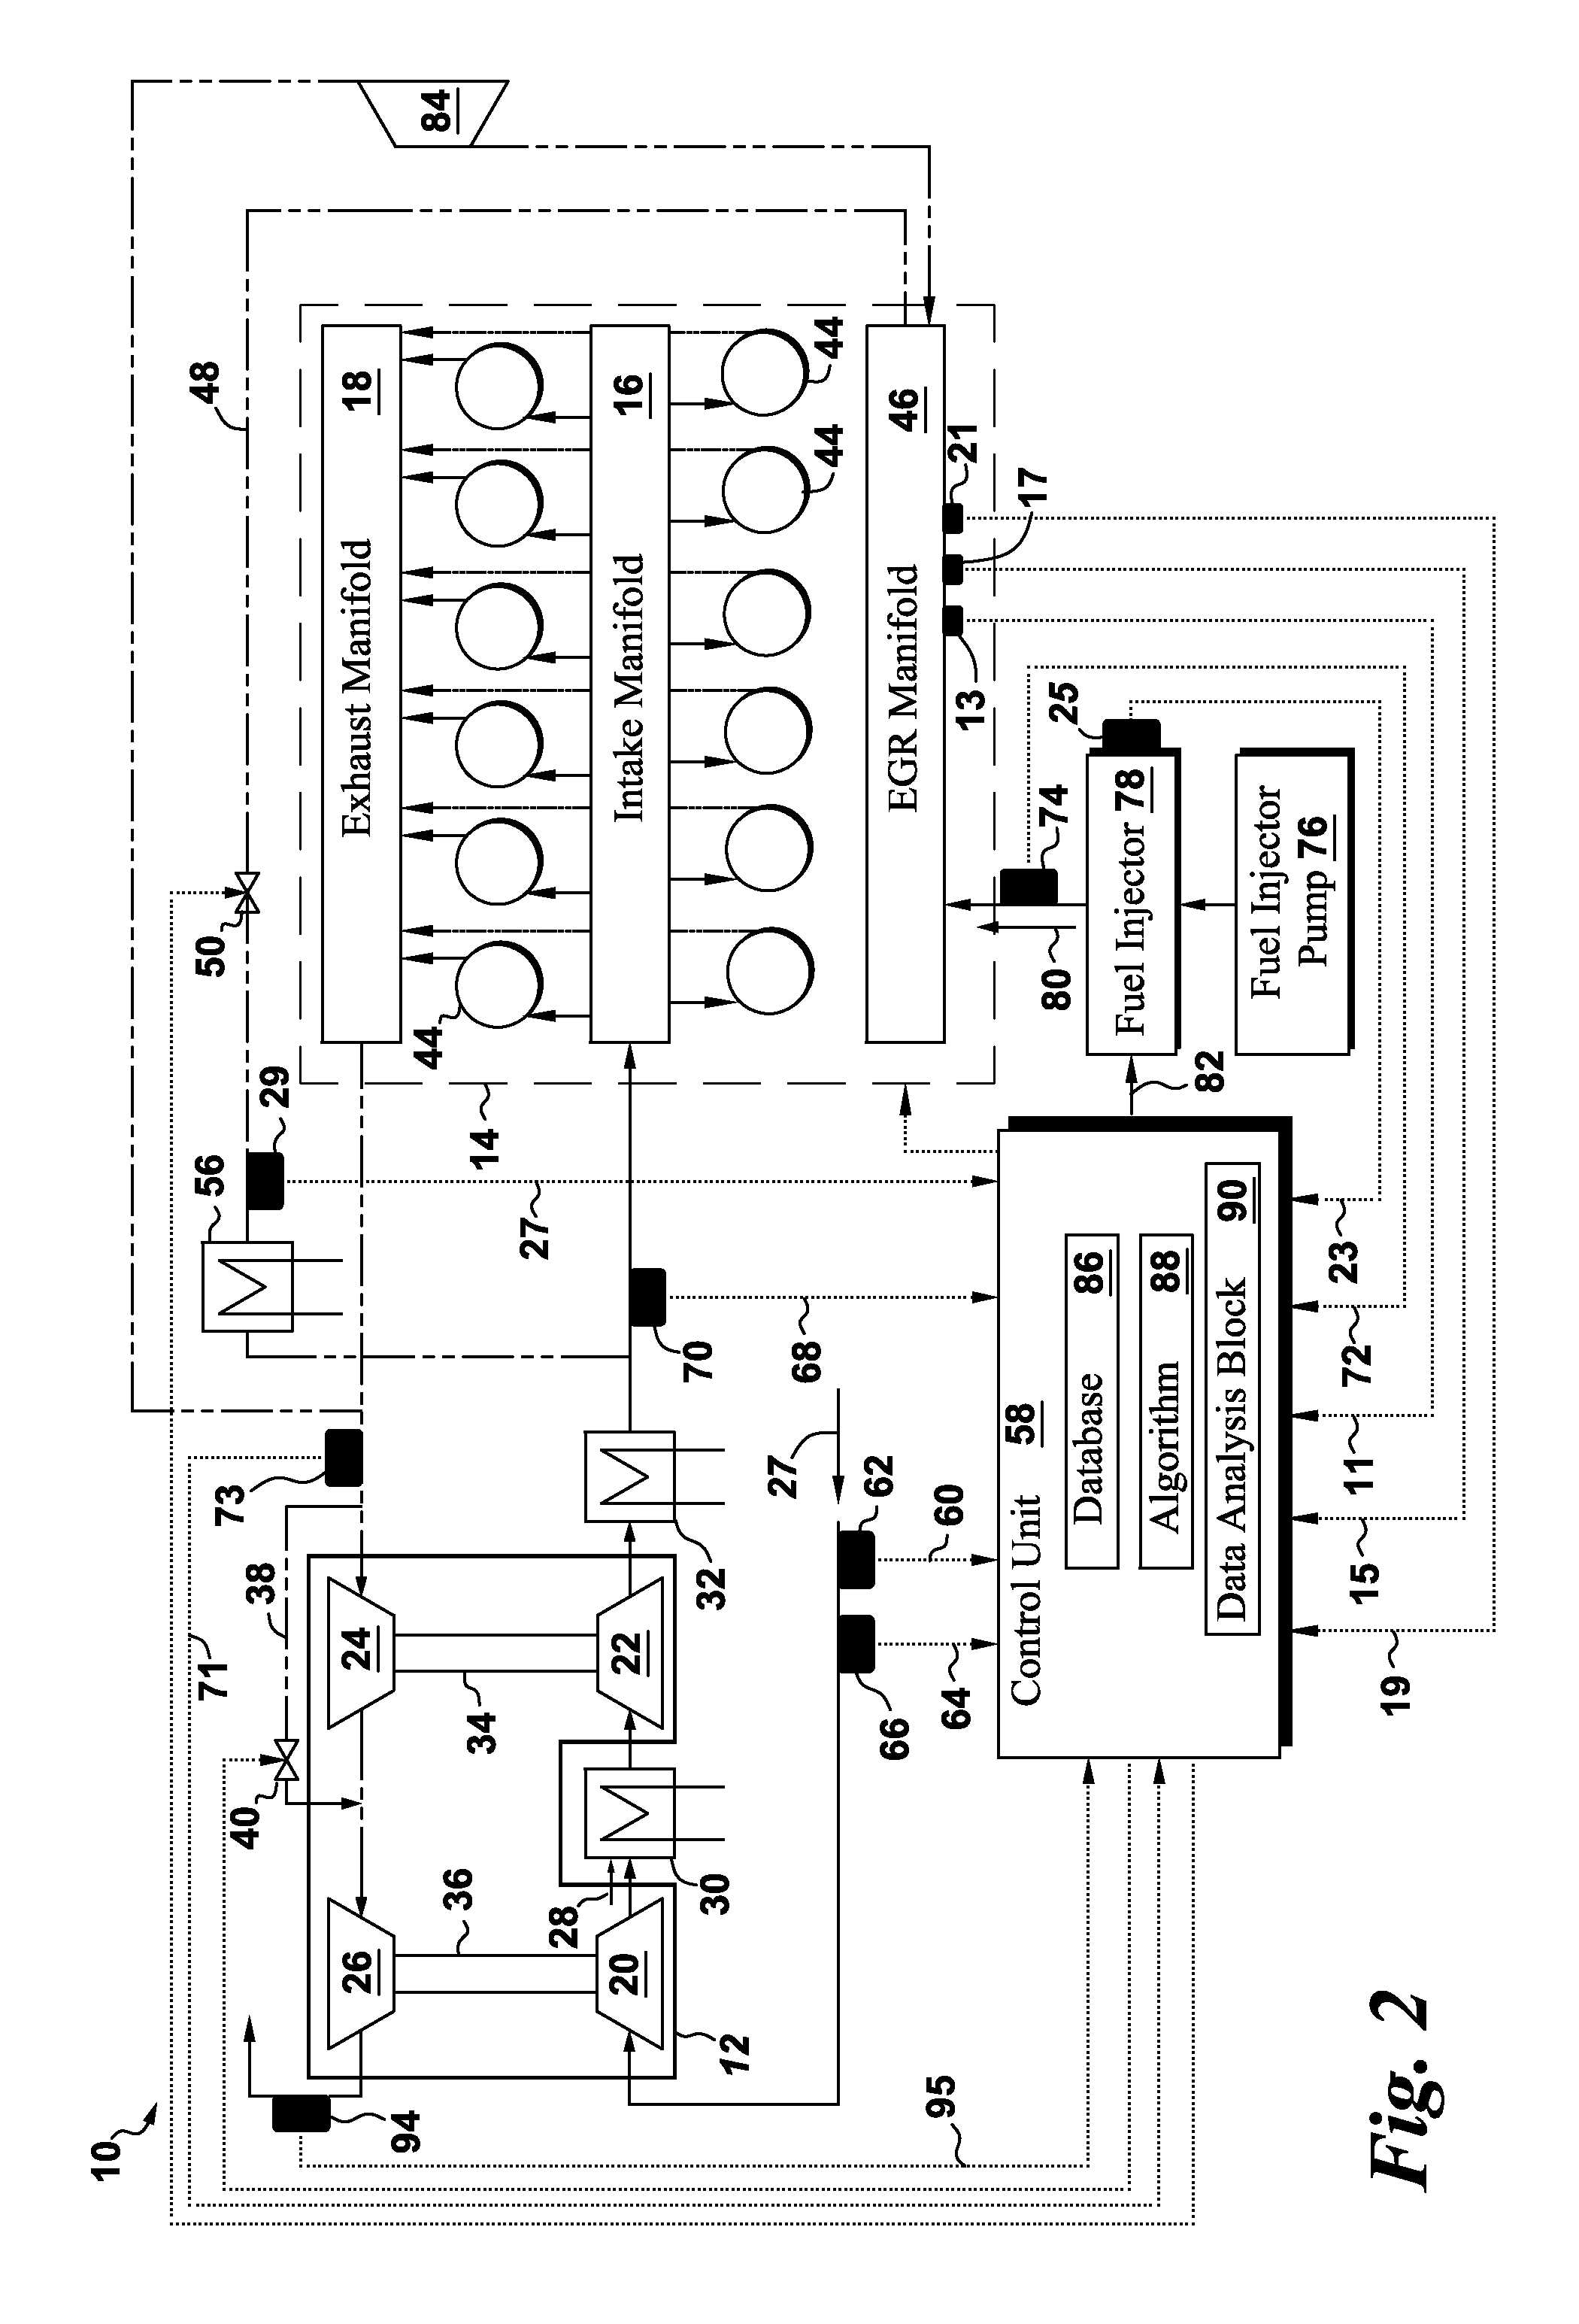 System and method for controlling exhaust emissions and specific fuel consumption of an engine